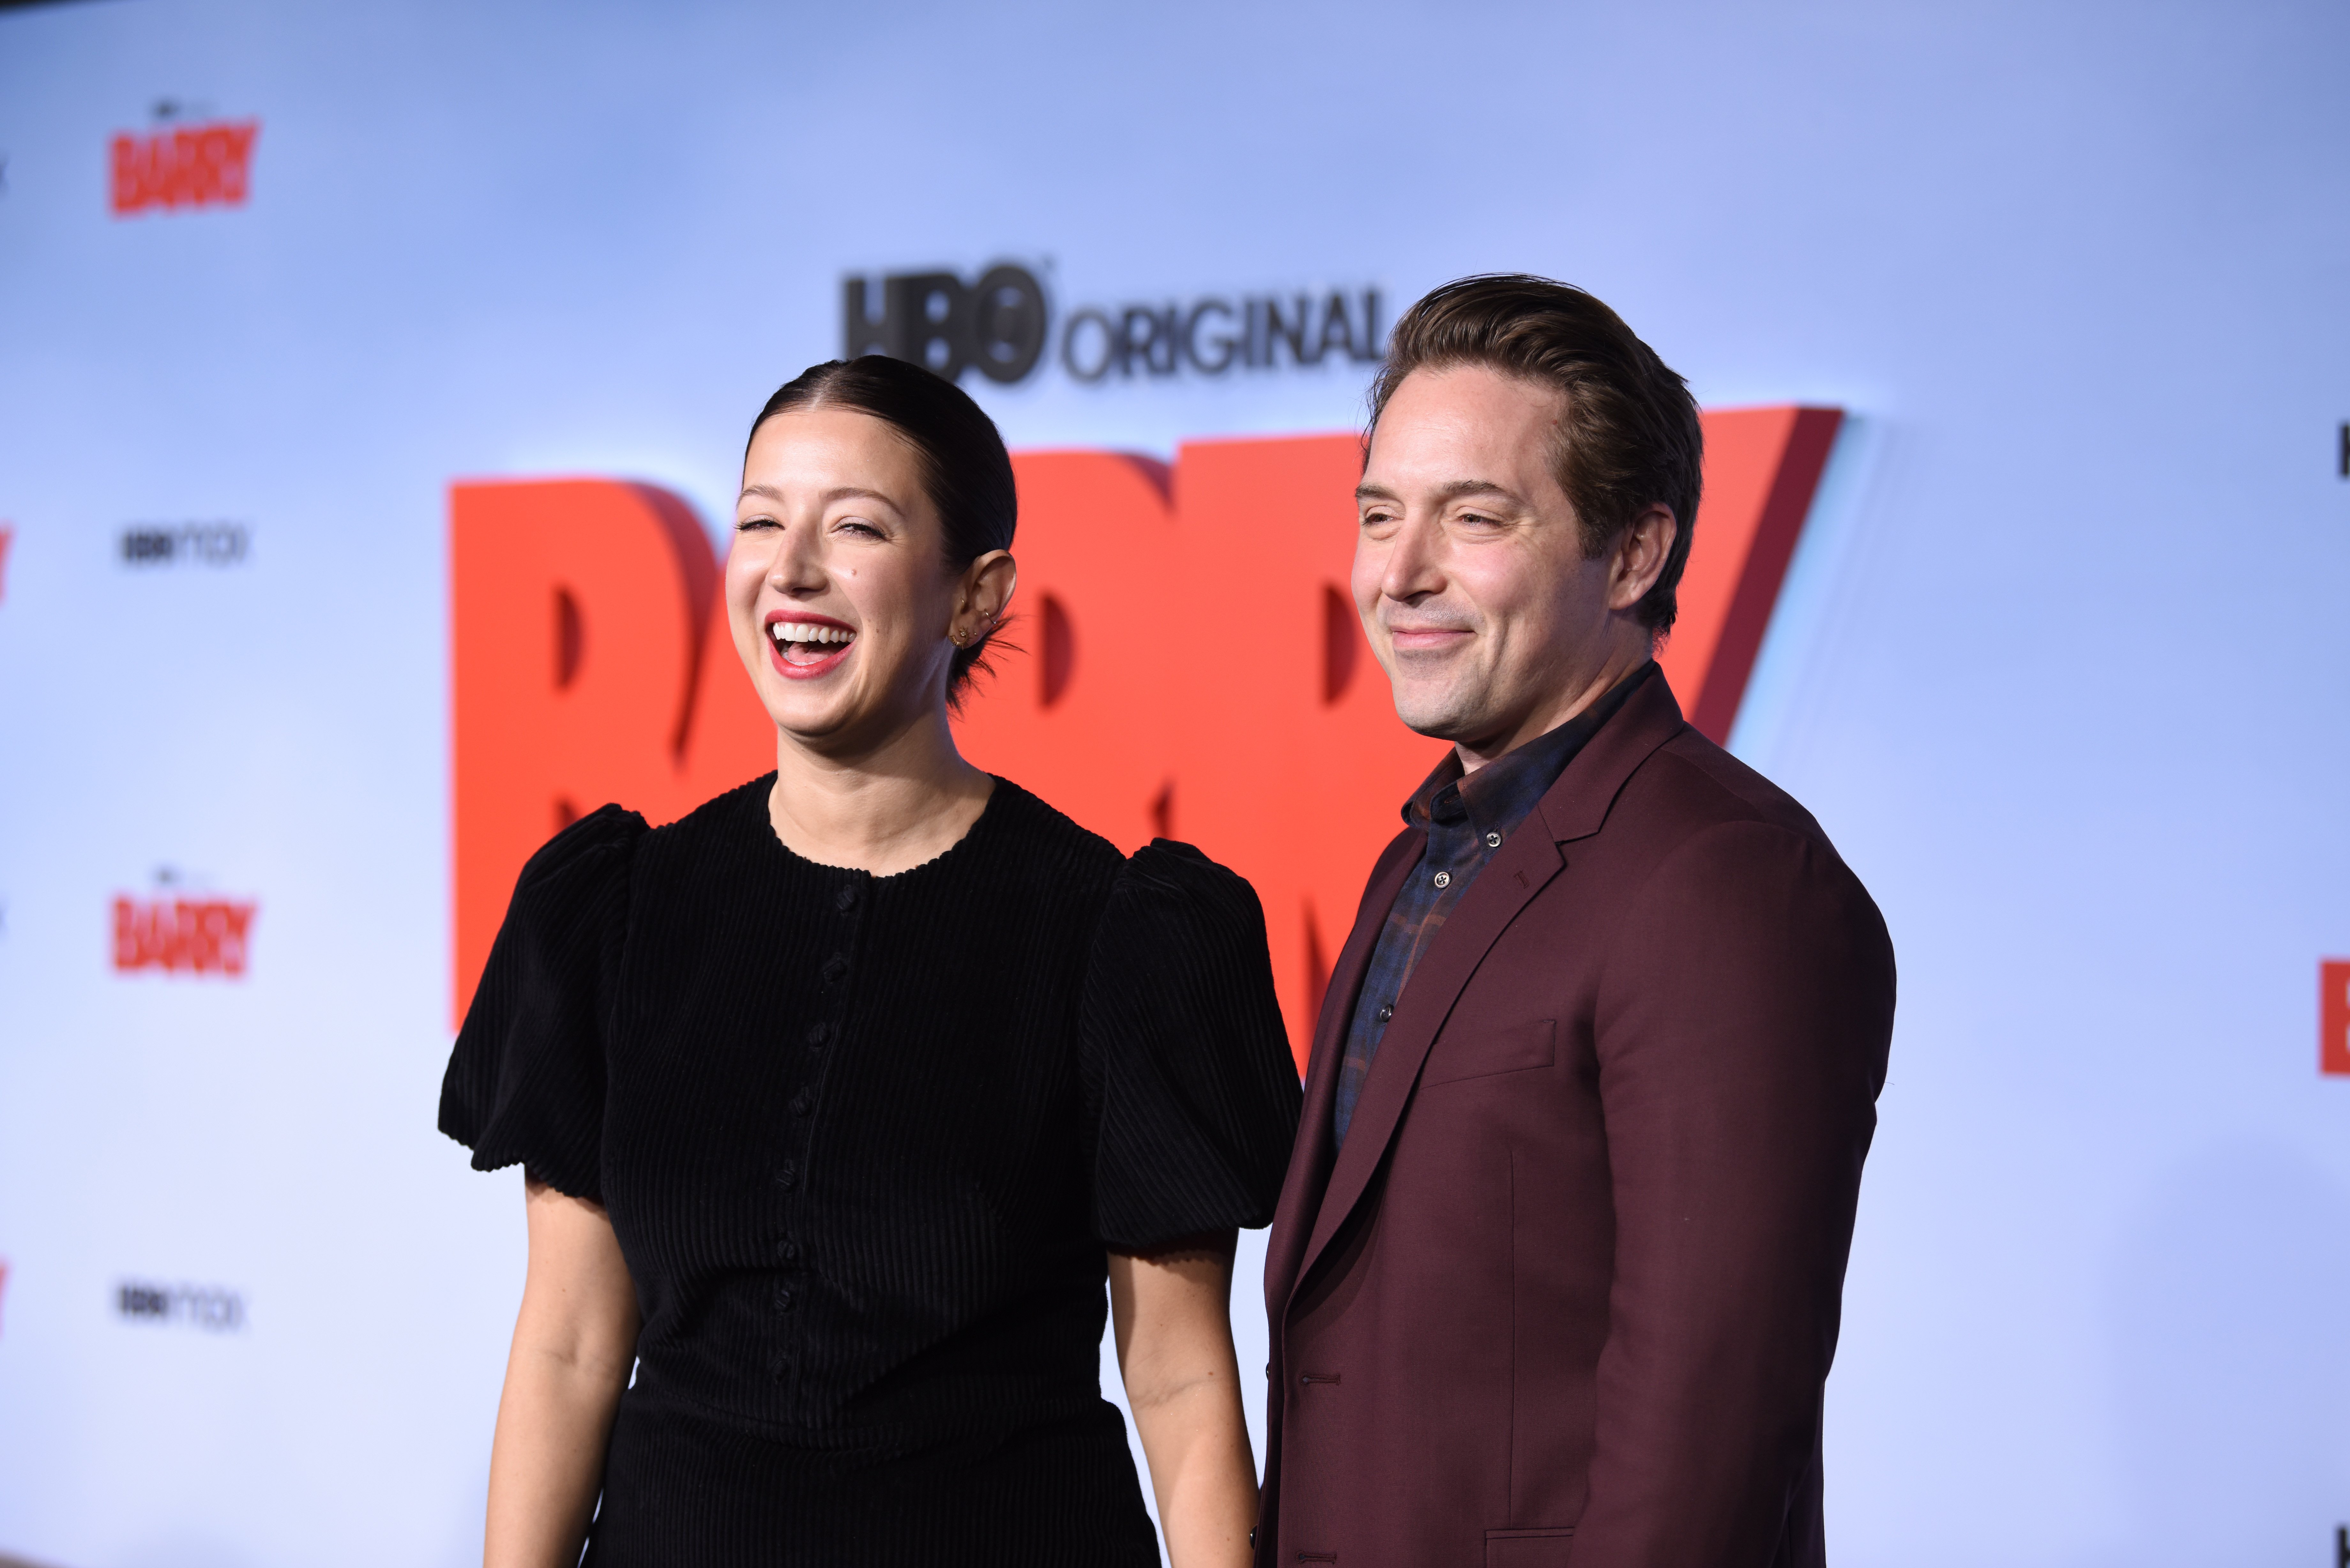 Jessy Hodges and her husband Beck Bennett attend the Season 3 premiere of HBO's "Barry" at Rolling Greens on April 18, 2022, in Culver City, California. | Source: Getty Images